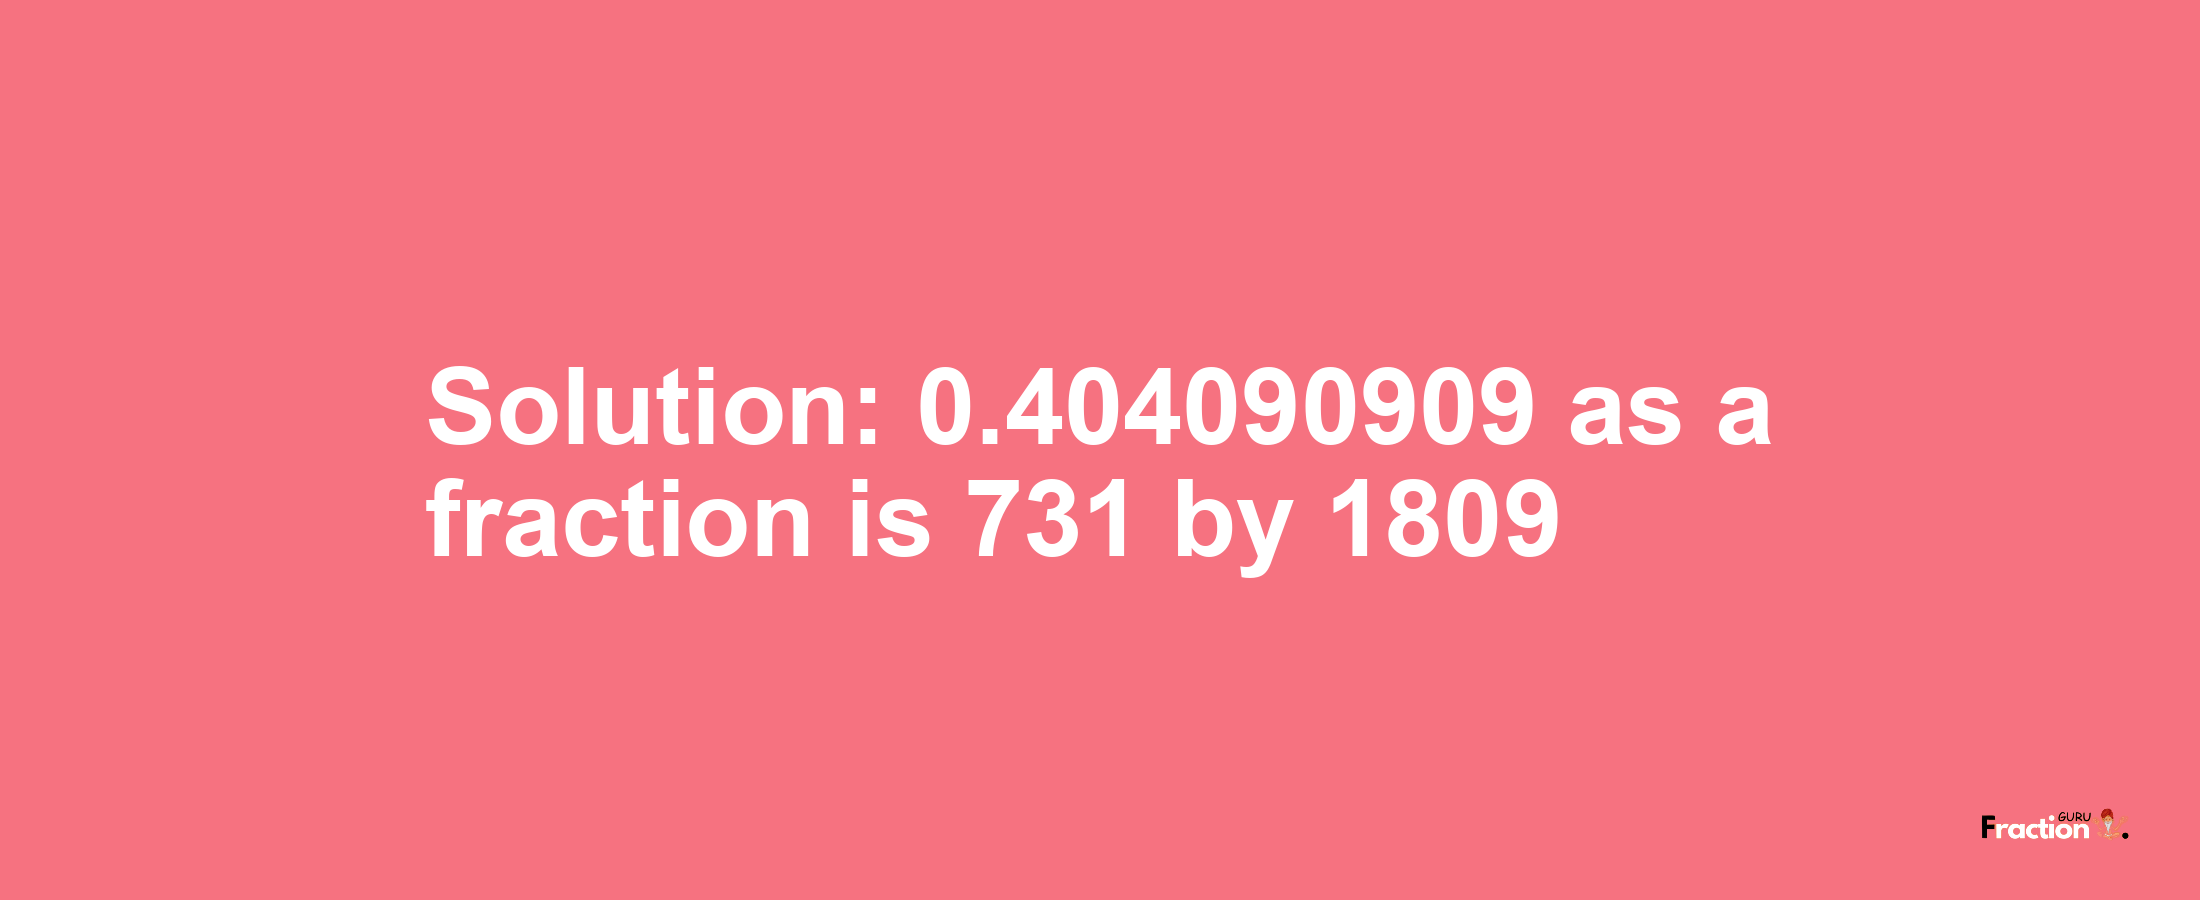 Solution:0.404090909 as a fraction is 731/1809